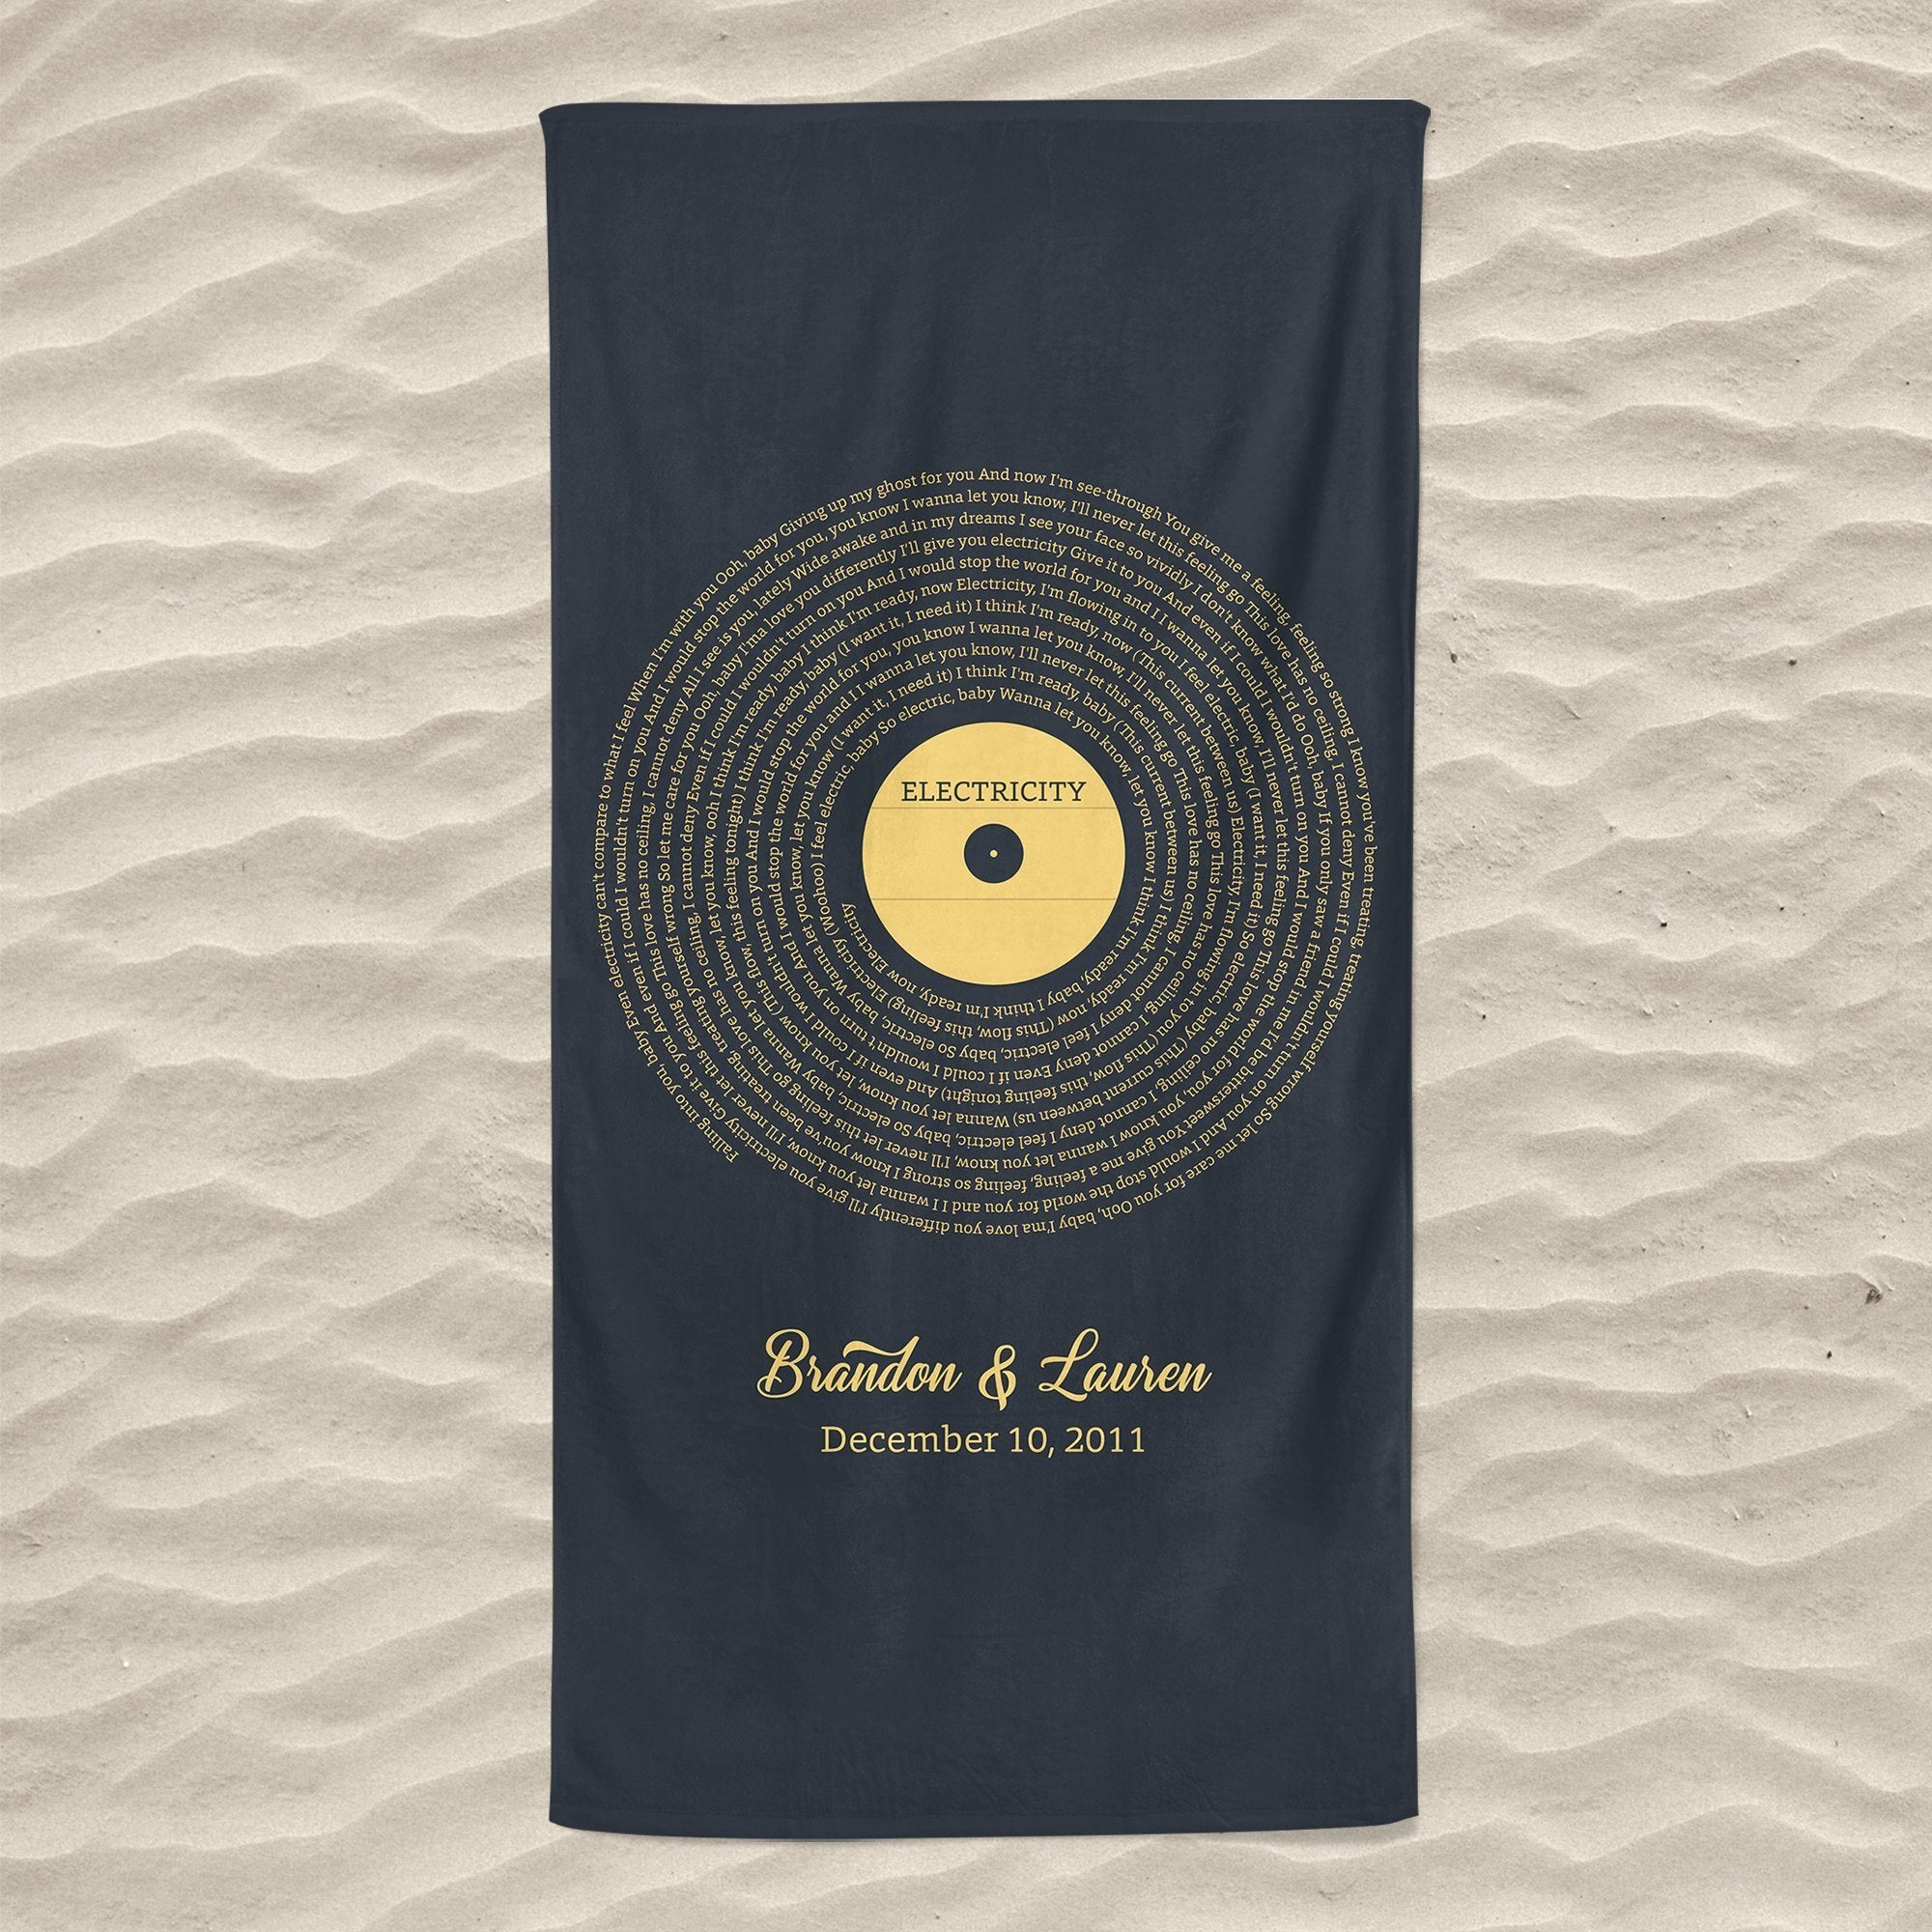 Custom Song Lyrics And Personalized Text, Vinyl Record Towel